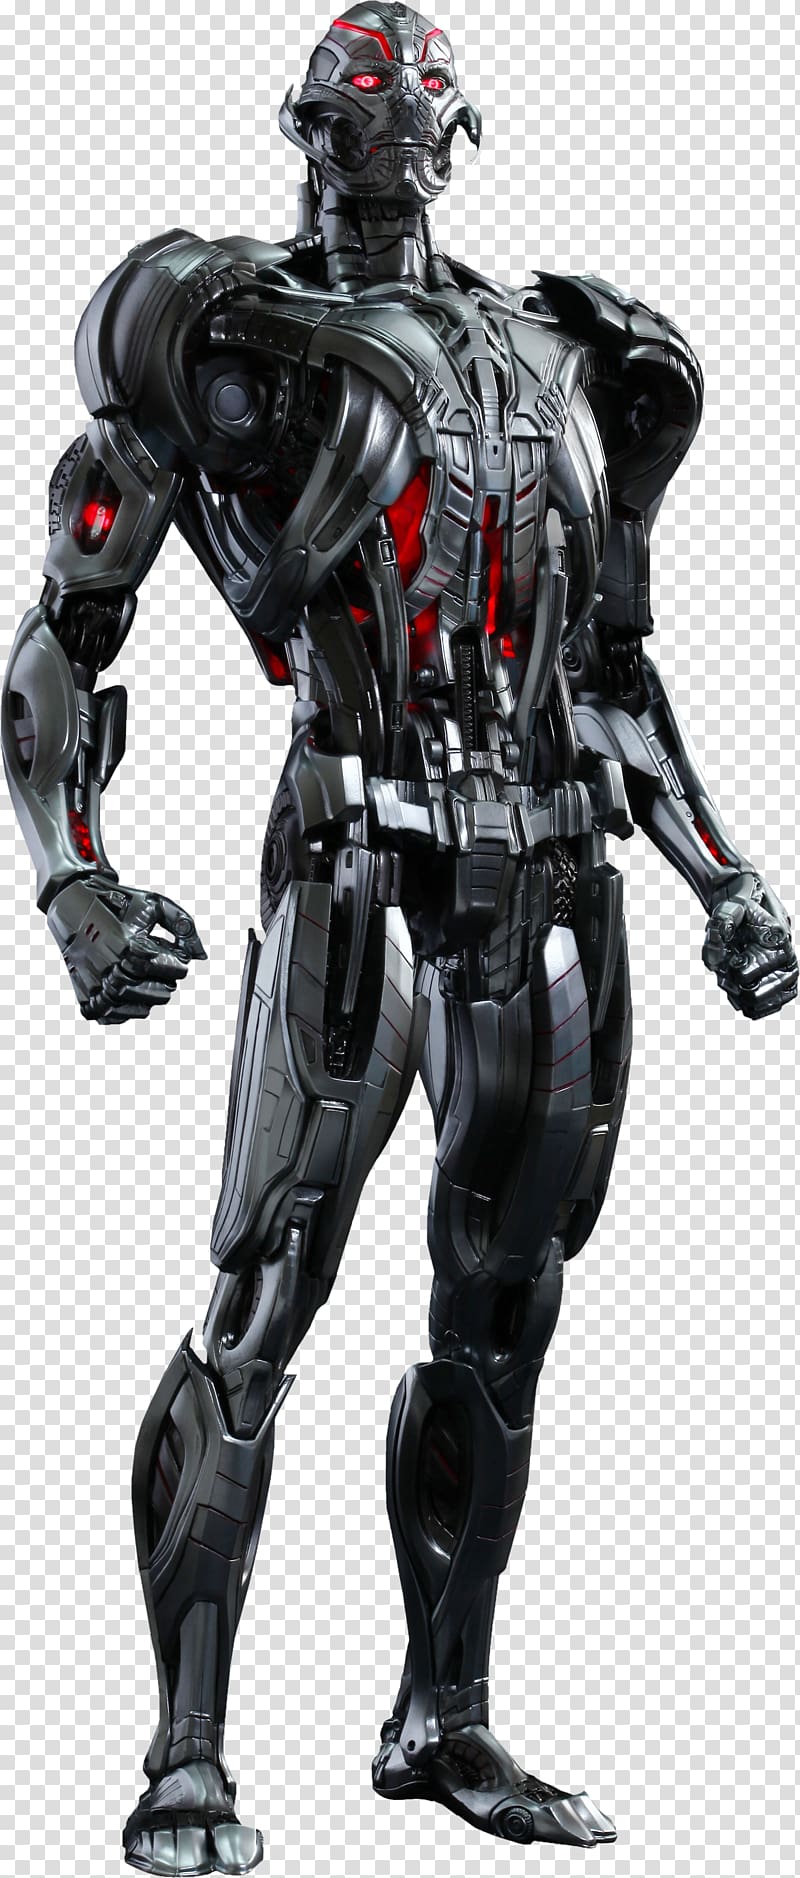 robot illustration, Ultron Iron Man Thor Captain America Hot Toys Limited, Ultron Pic transparent background PNG clipart